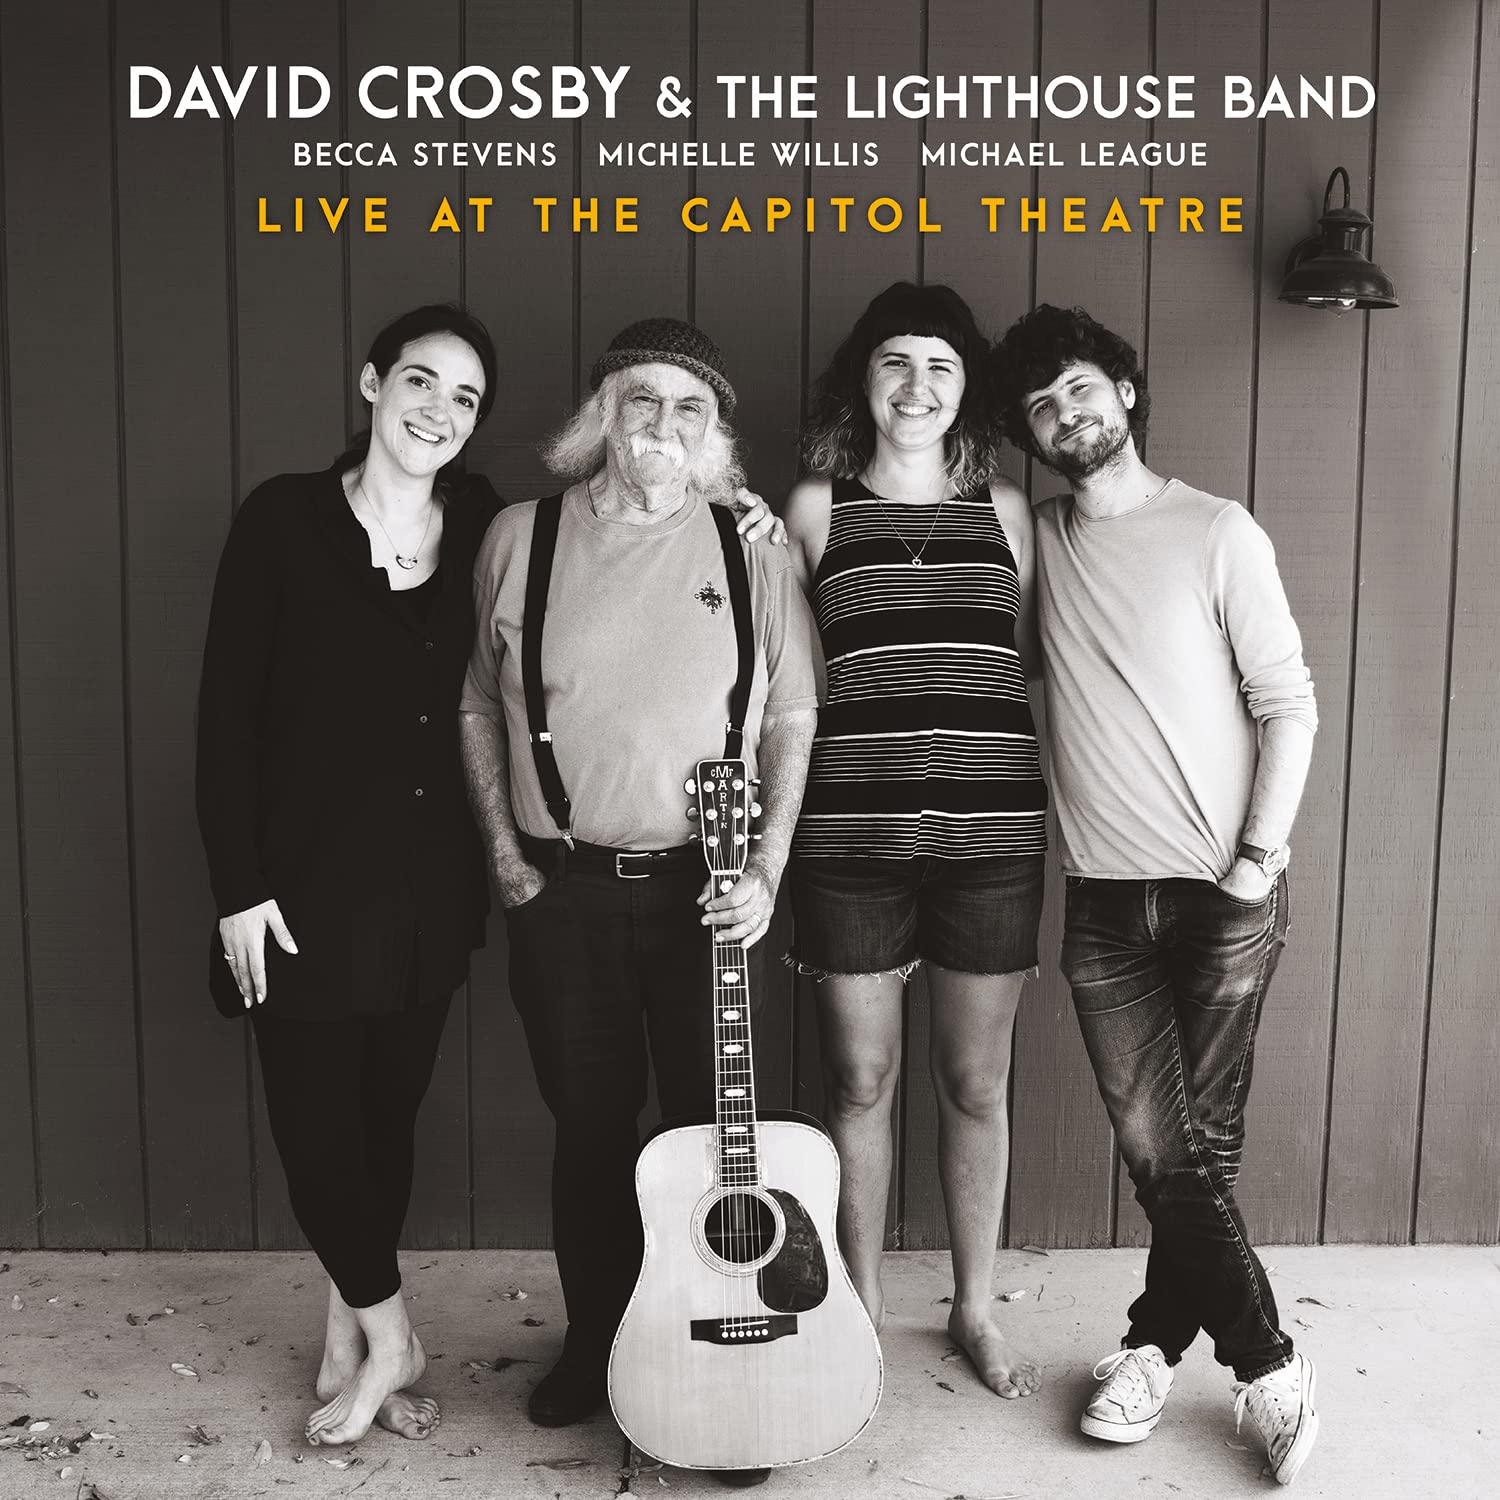 David Crosby & The Lighthouse Band: Live at the Capitol Theater